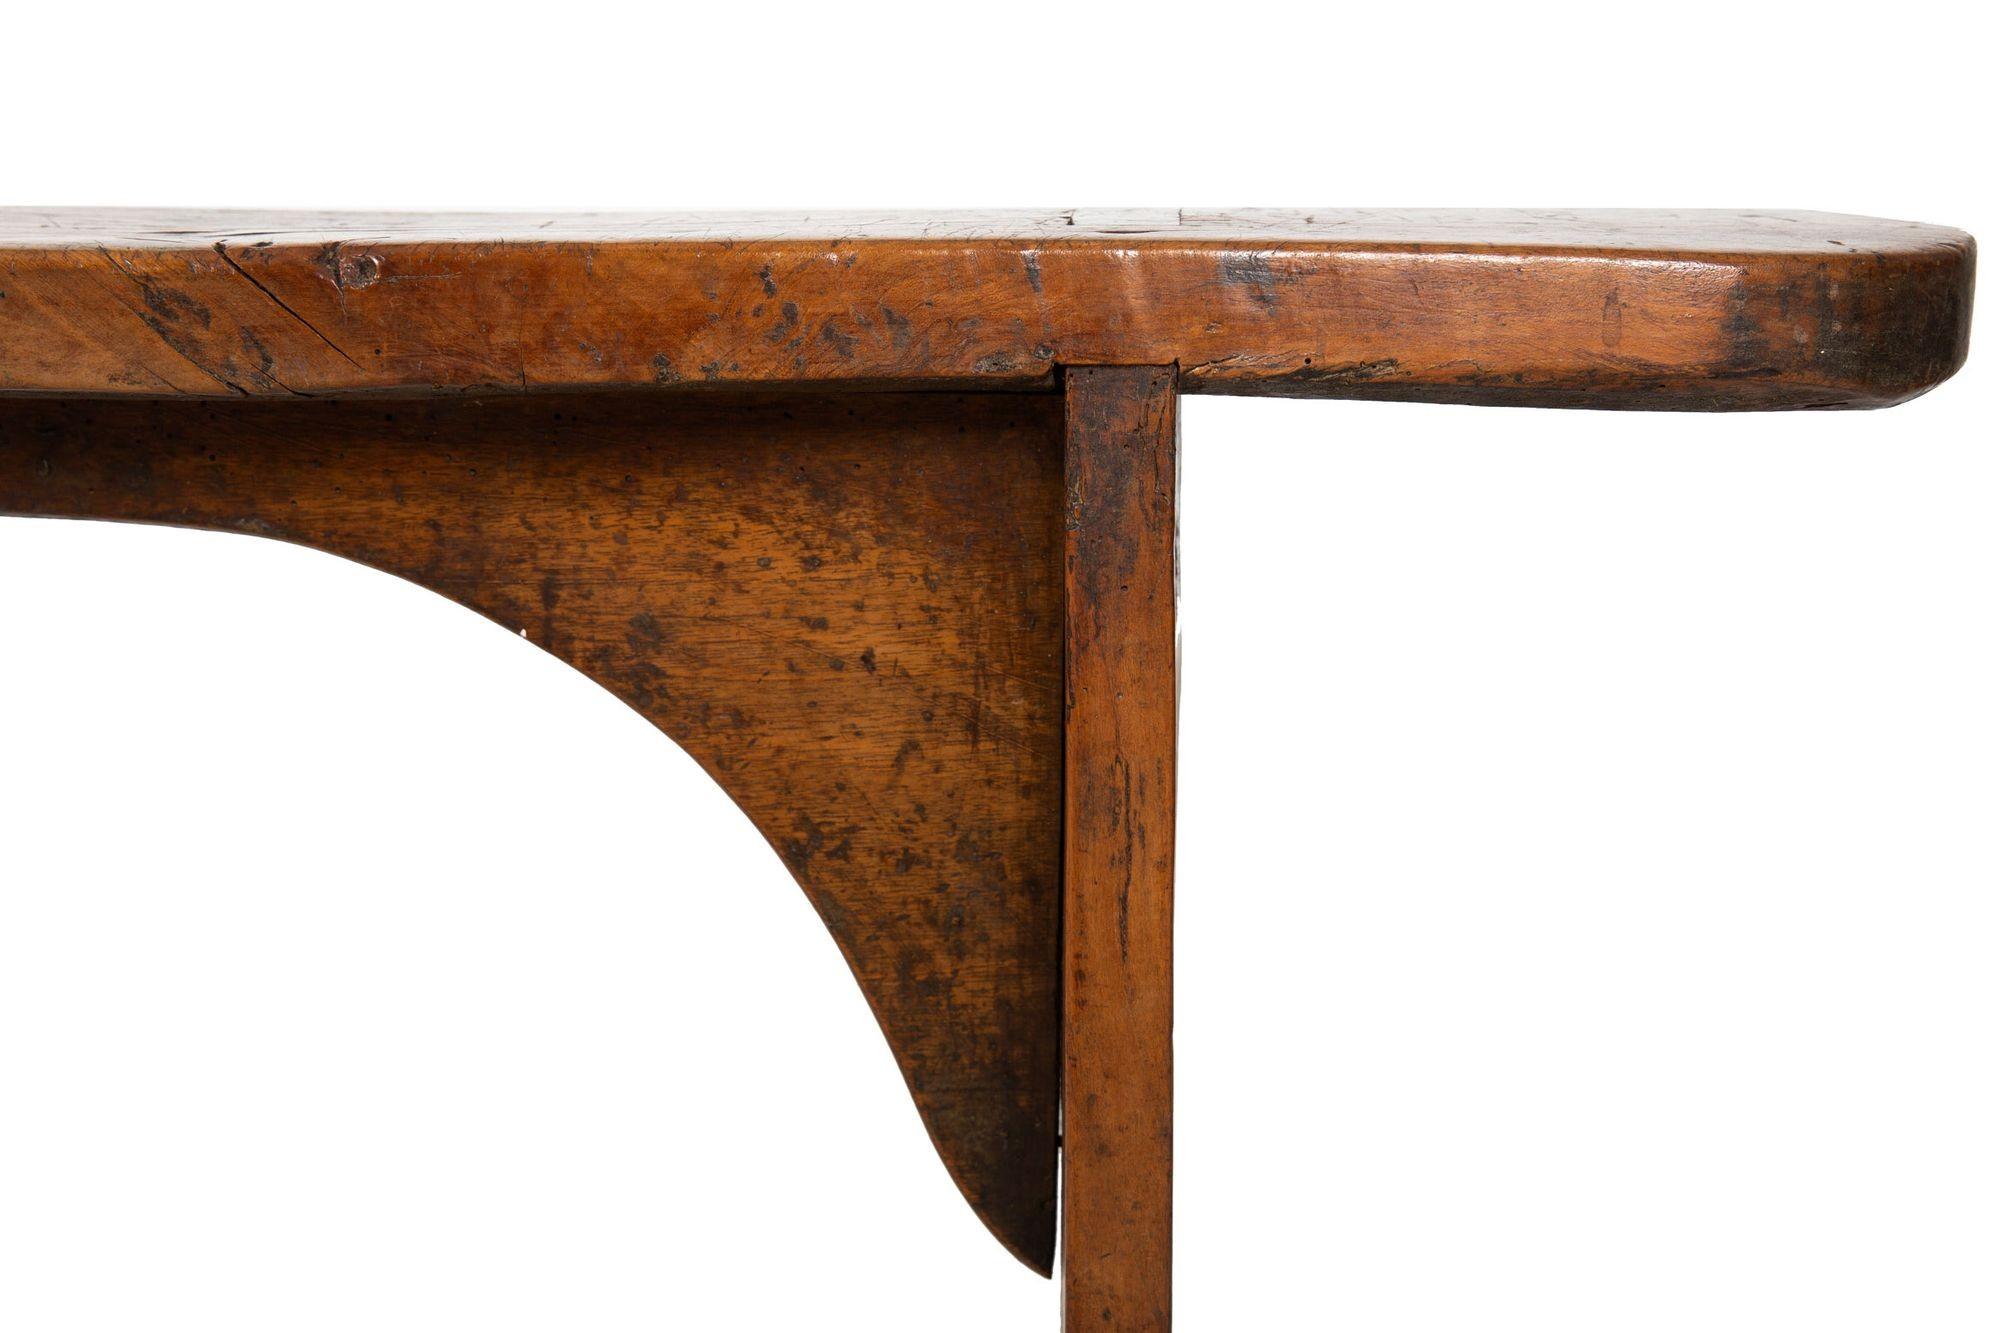 circa 1750 English Georgian Patinated and Worn Elm Trestle Bench For Sale 6